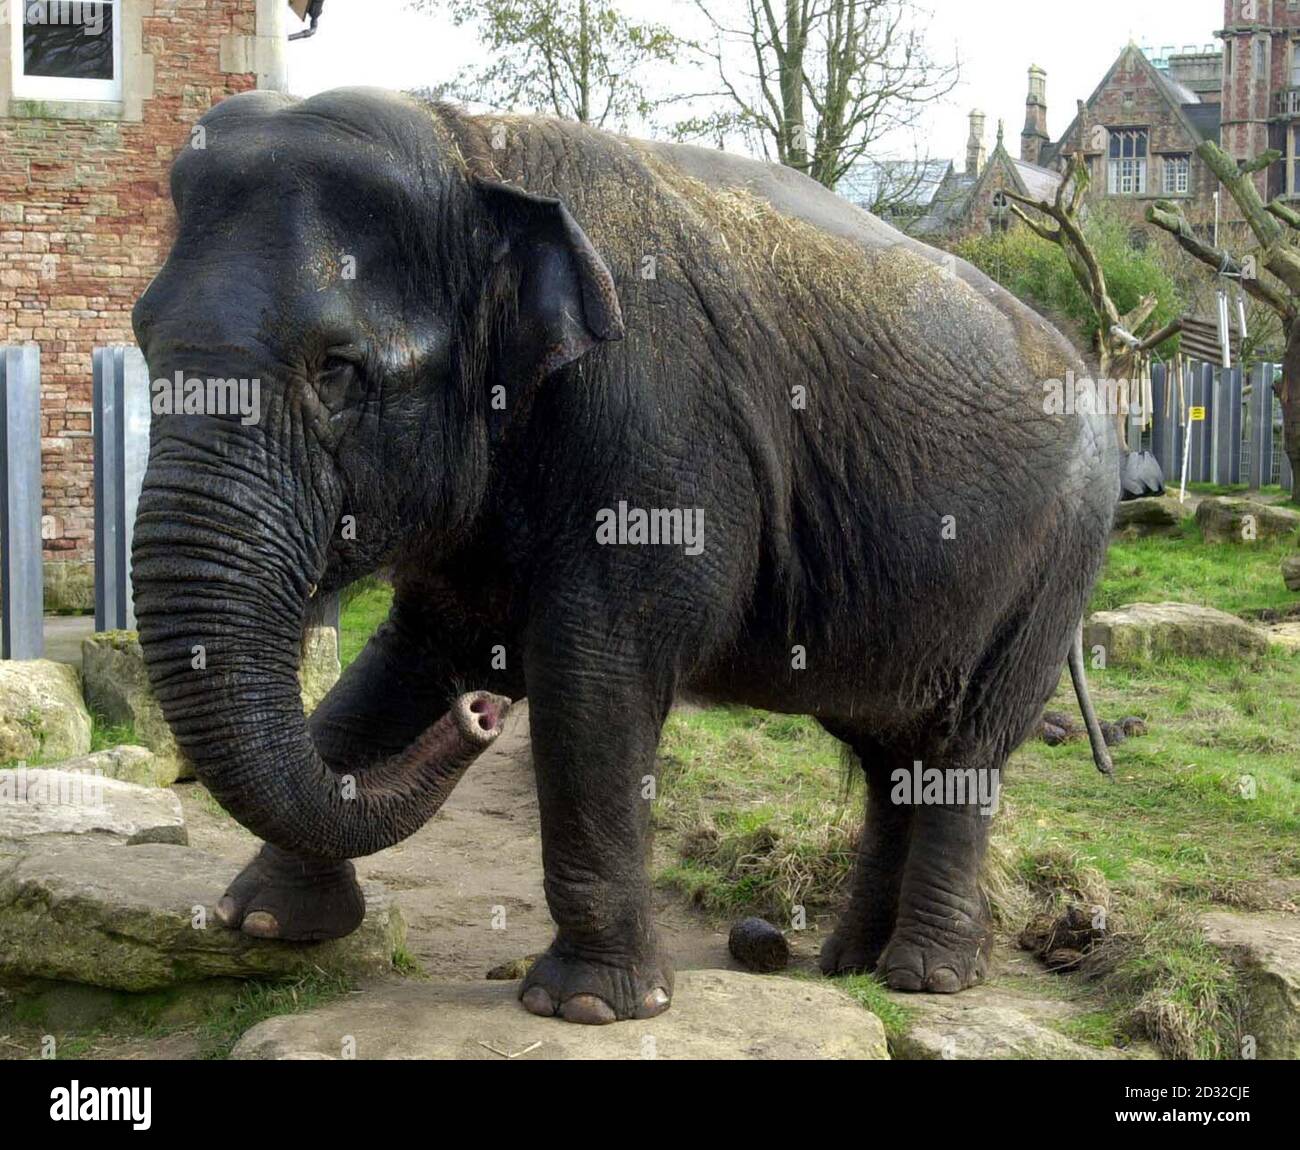 Wendy, a 42-year-old elephant at Bristol Zoo who gets a regular daily spraying of moisturising cream that helps her condition, diagnosed as Hyperkeratosis, which causes dry, rough skin and eczema. * After her skin improved enormously, manufacturers Stiefel has offered to supply Bristol Zoo with enough of the cream to last the Asian elephant the rest of her life - which could be up to another 30 years. Stock Photo